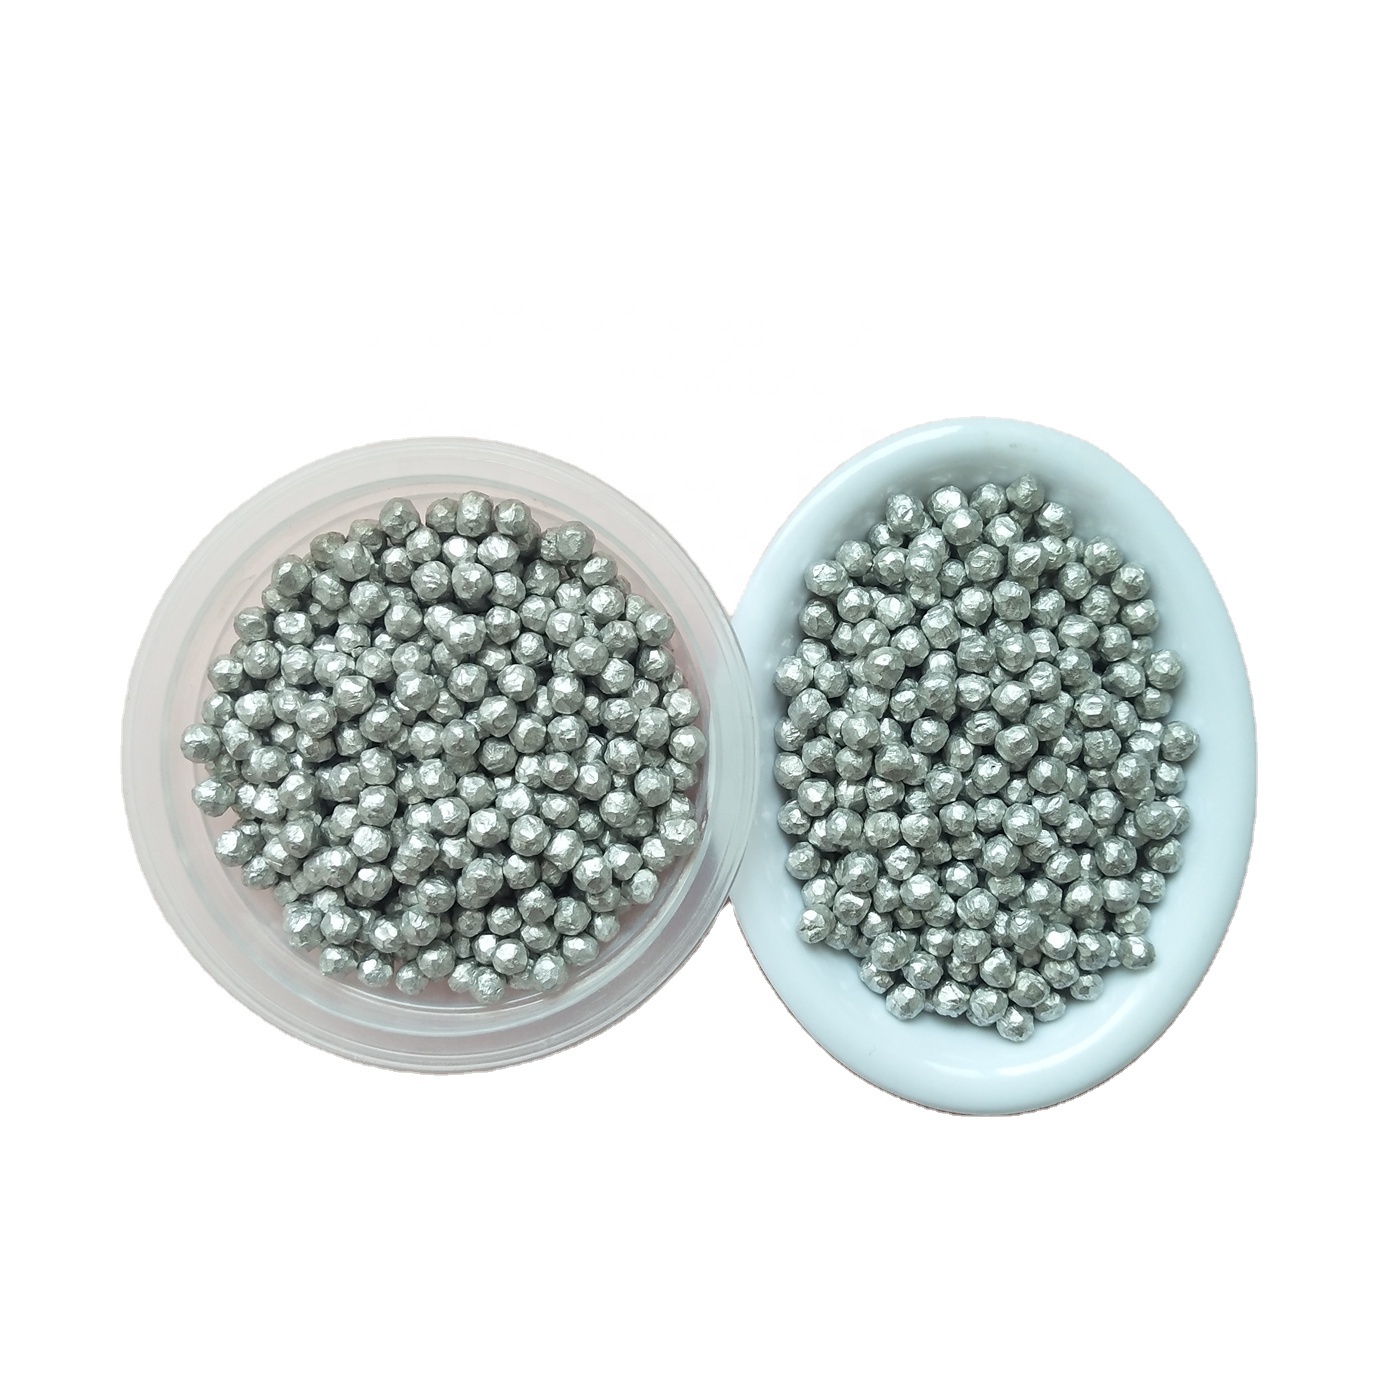 Magnesium ball water treatment filter material metal negative potential particle